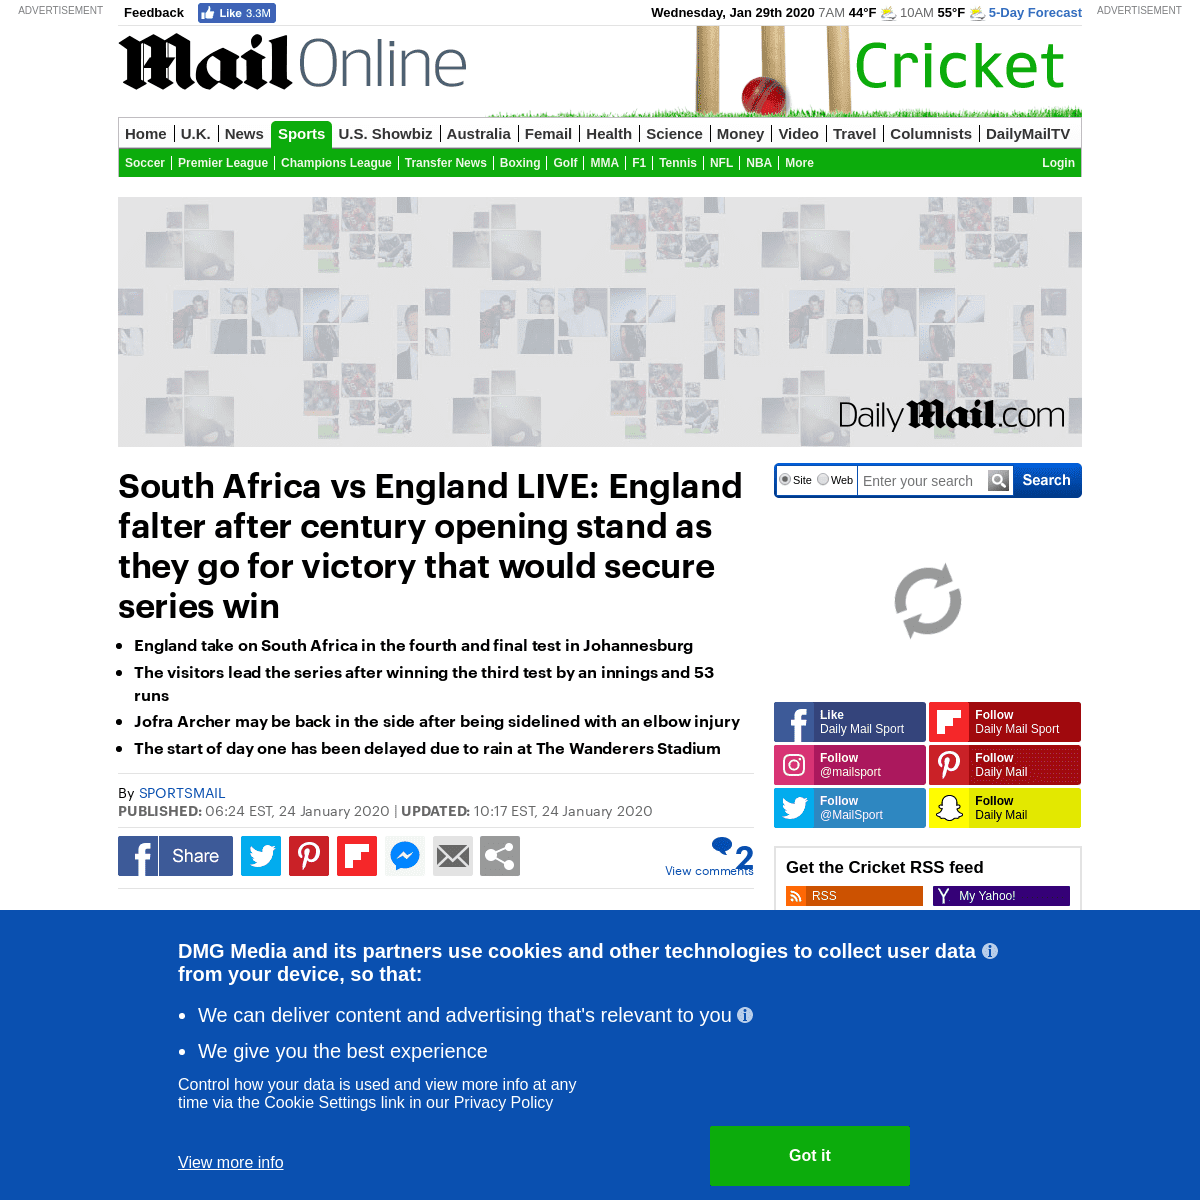 A complete backup of www.dailymail.co.uk/sport/cricket/article-7924067/South-Africa-vs-England-LIVE-Follow-day-one-fourth-test-J